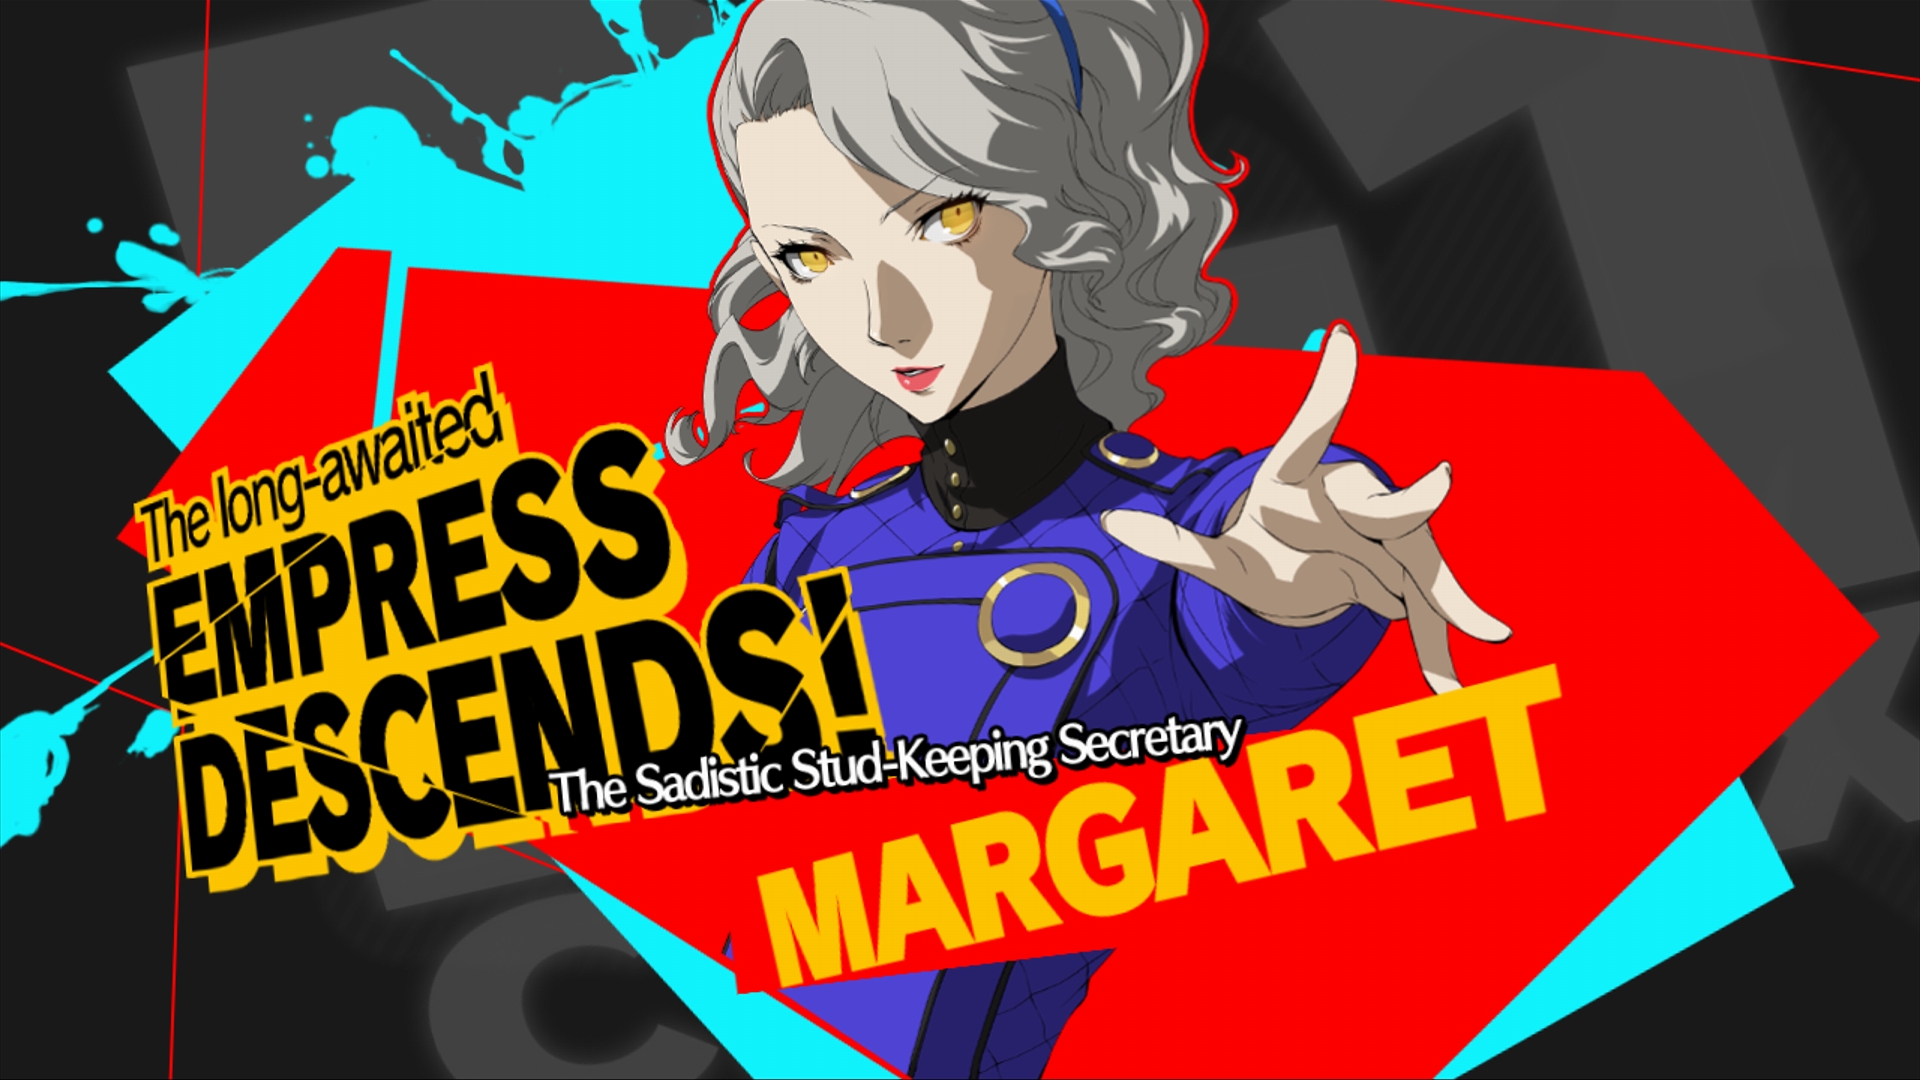 Margaret is Coming West as Paid DLC in Persona 4 Arena Ultimax